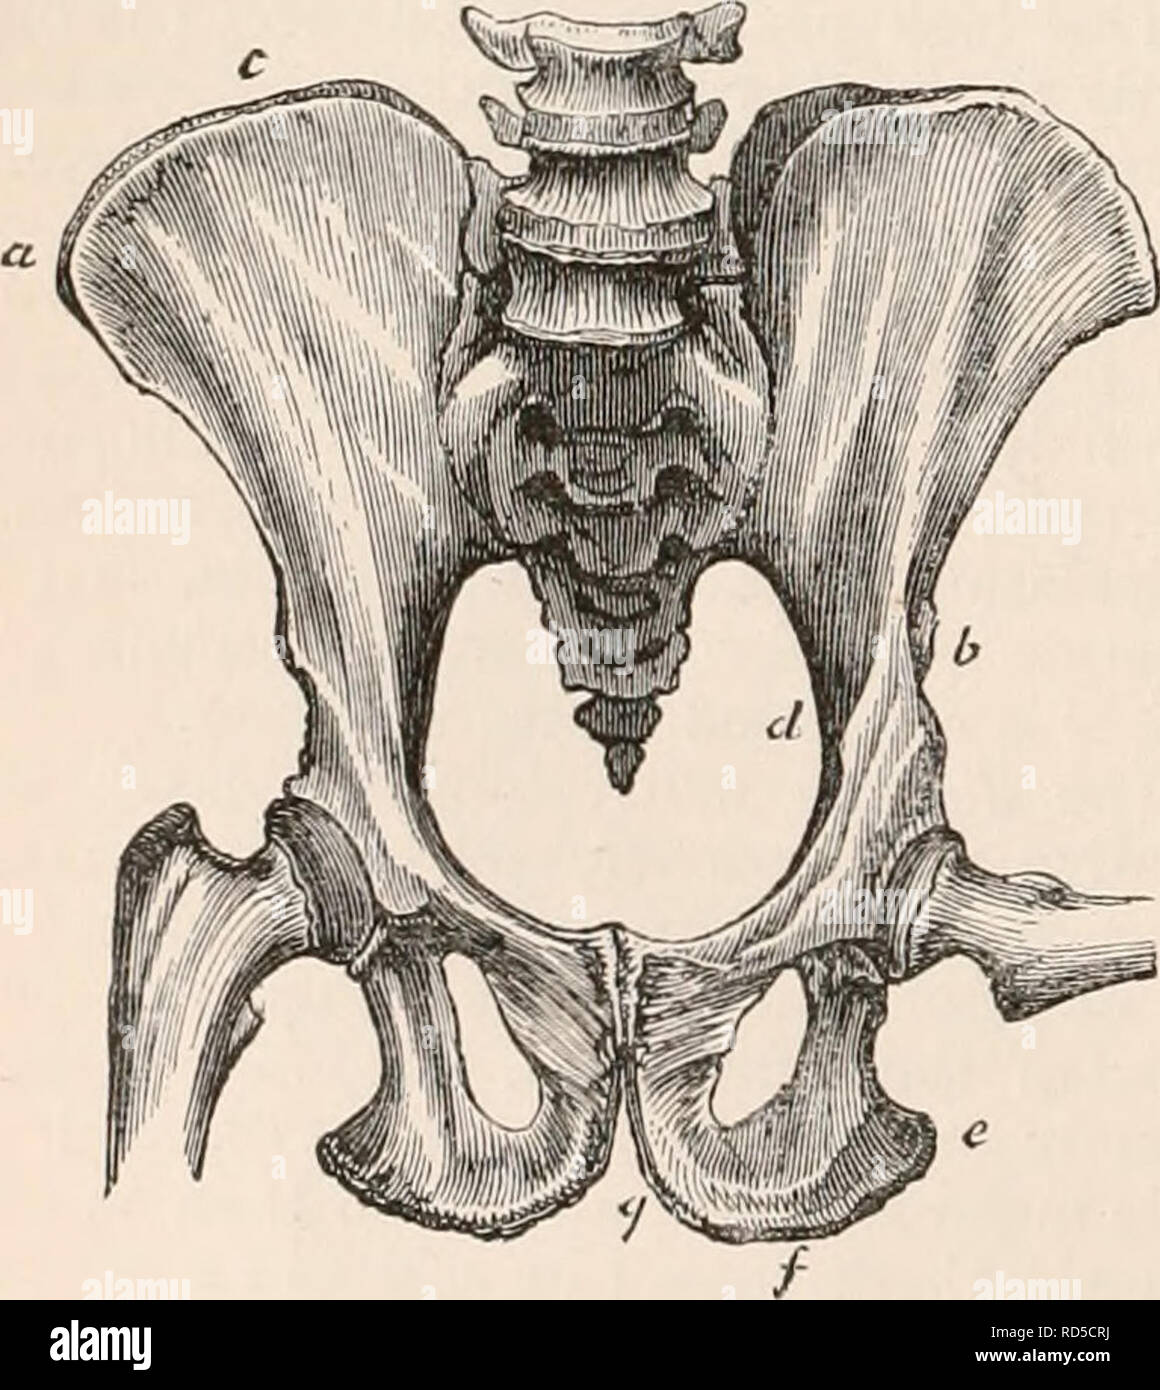 . The cyclopædia of anatomy and physiology. Anatomy; Physiology; Zoology. 152 PELVIS. wings, the anterior part seems deficient, the anterior superior spine'(a) being placed directly over the cotyloid cavity ; and the crest (c) being, consequently, very short, terminating abruptly at the vertical rib mentioned in the description of the human ilium. The ales are more expanded in the Uran than the Chimpanzee. The crest does not present the lateral /-like curvature, and is less arched than in man. The anterior iliac spines are more widely separated, the inferior (6) being scarcely discernible, and Stock Photo